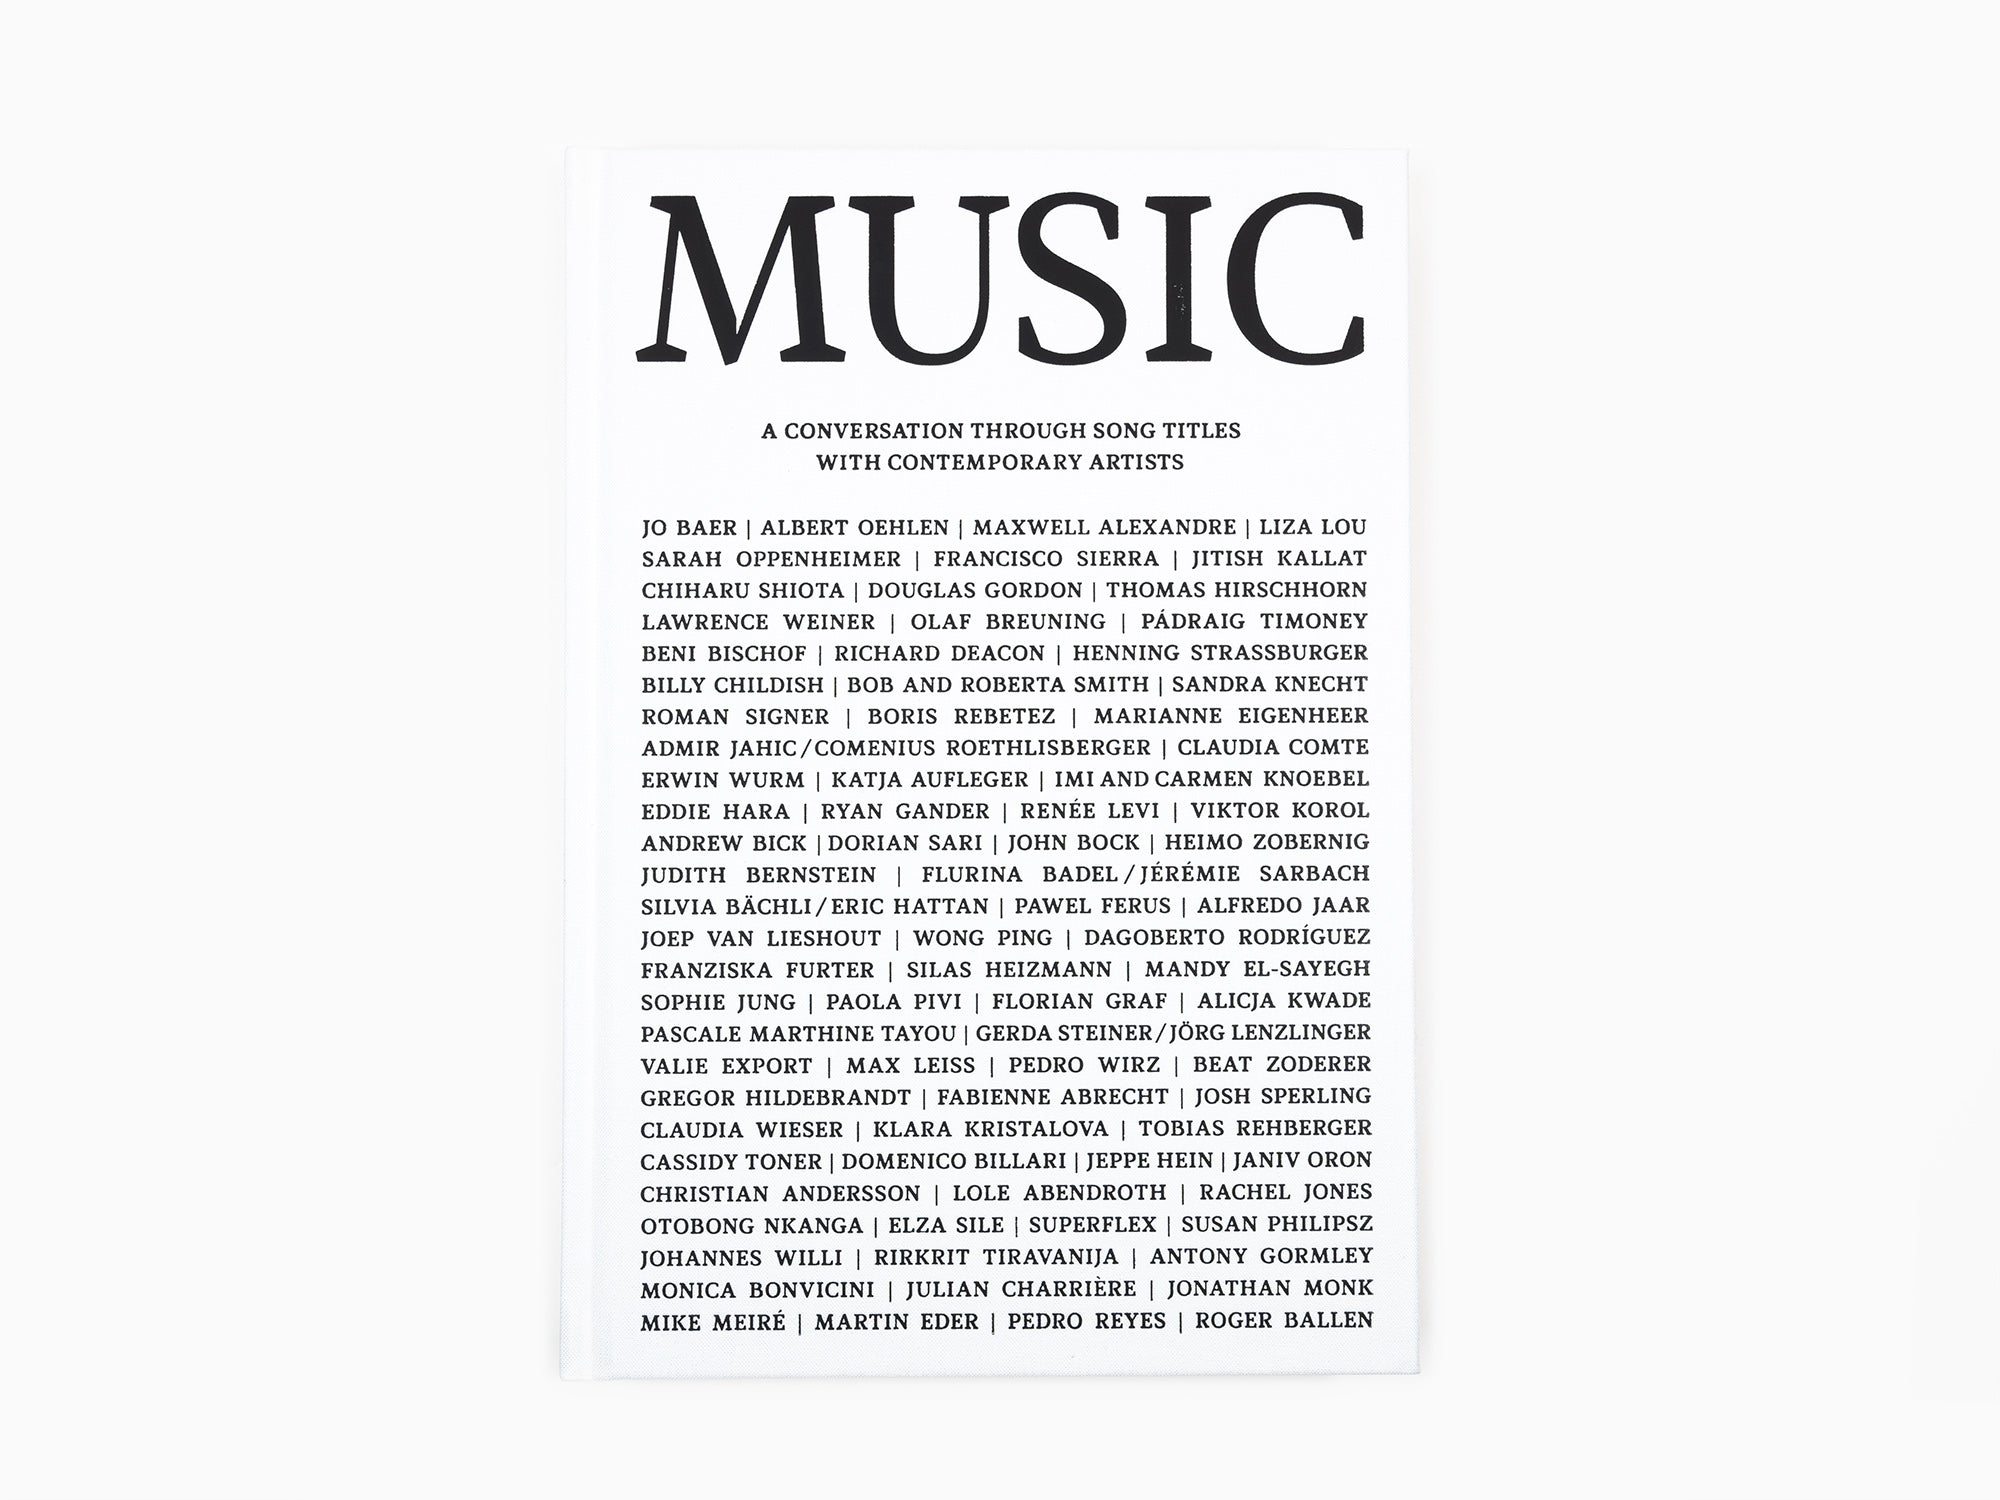 Music - A conversation through song titles with contemporary artists